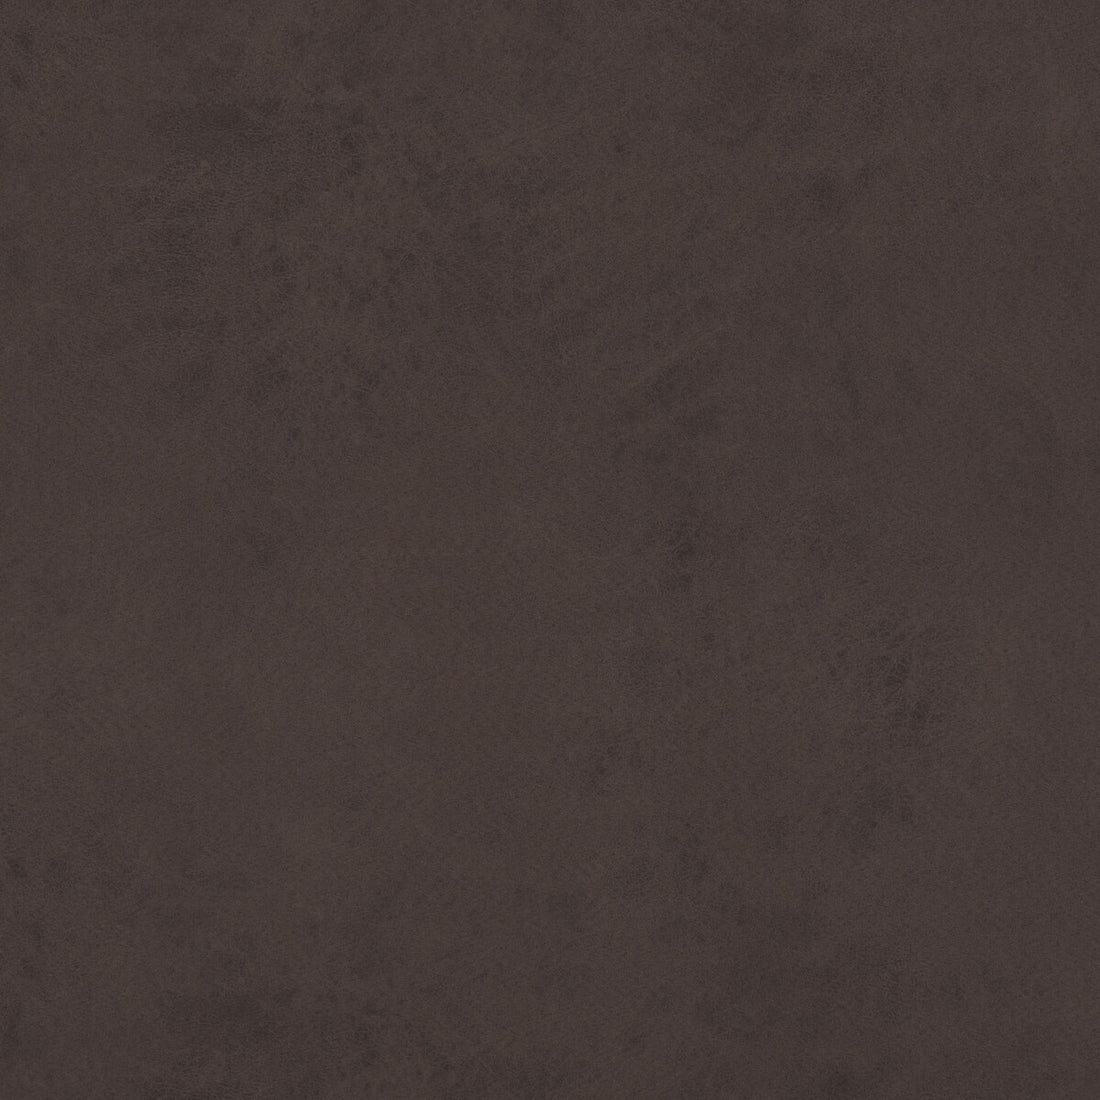 Lexham fabric in coffee bean color - pattern PF50412.295.0 - by Baker Lifestyle in the Notebooks collection